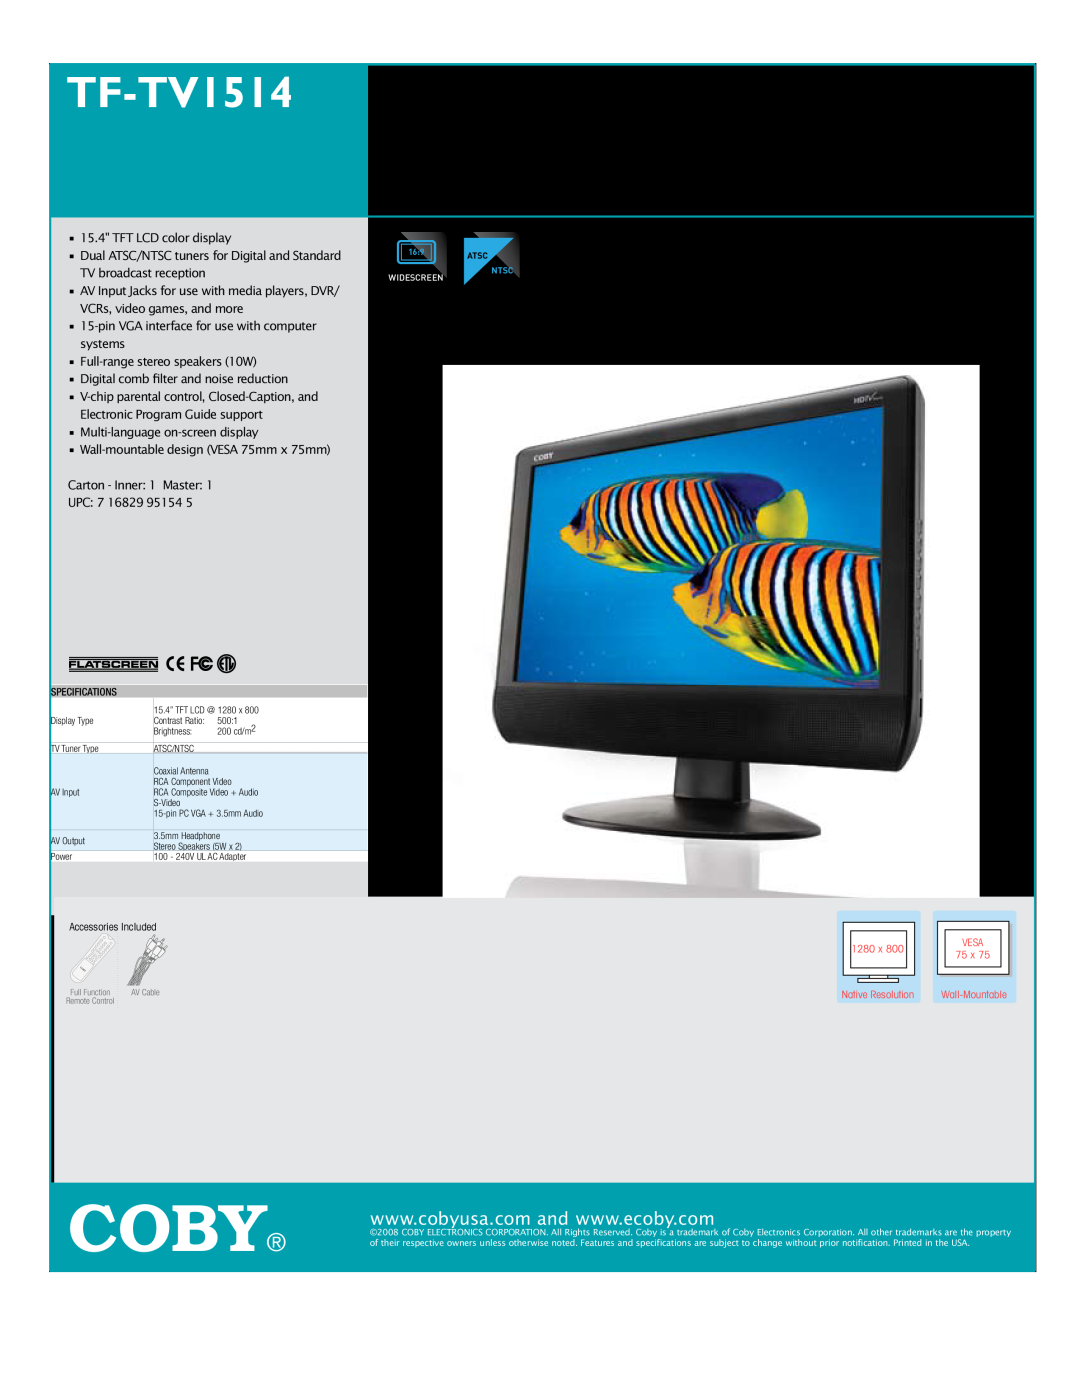 COBY electronic specifications Coby, TF-TV1514 15 WIDESCREEN LCD HDTV MONITOR 